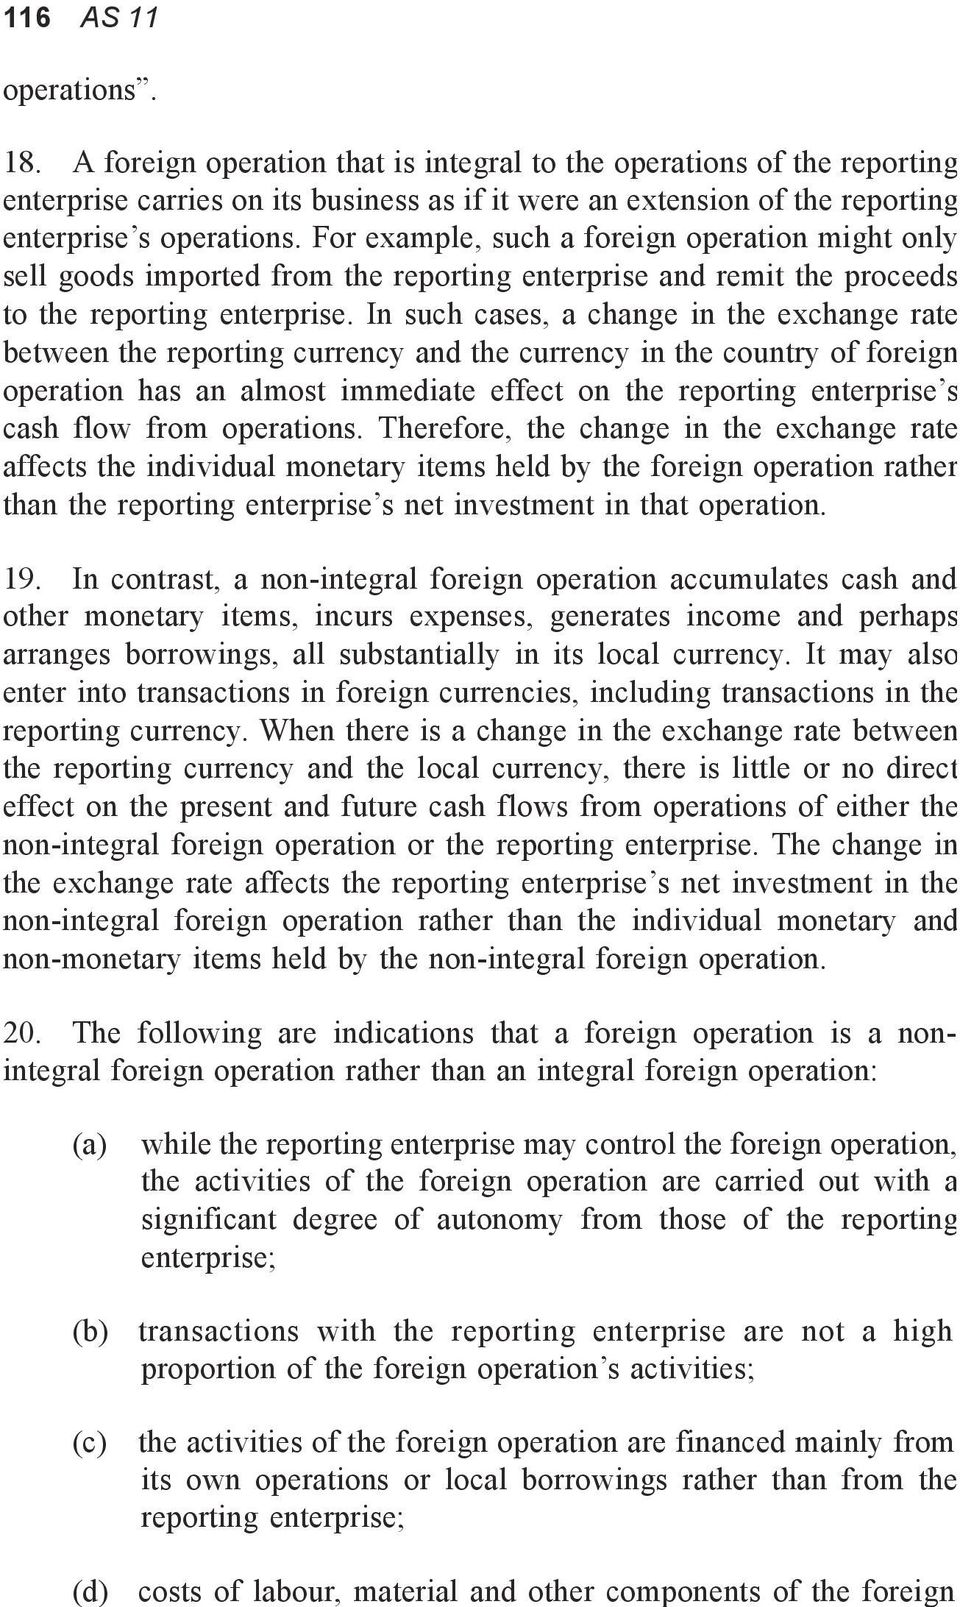 For example, such a foreign operation might only sell goods imported from the reporting enterprise and remit the proceeds to the reporting enterprise.